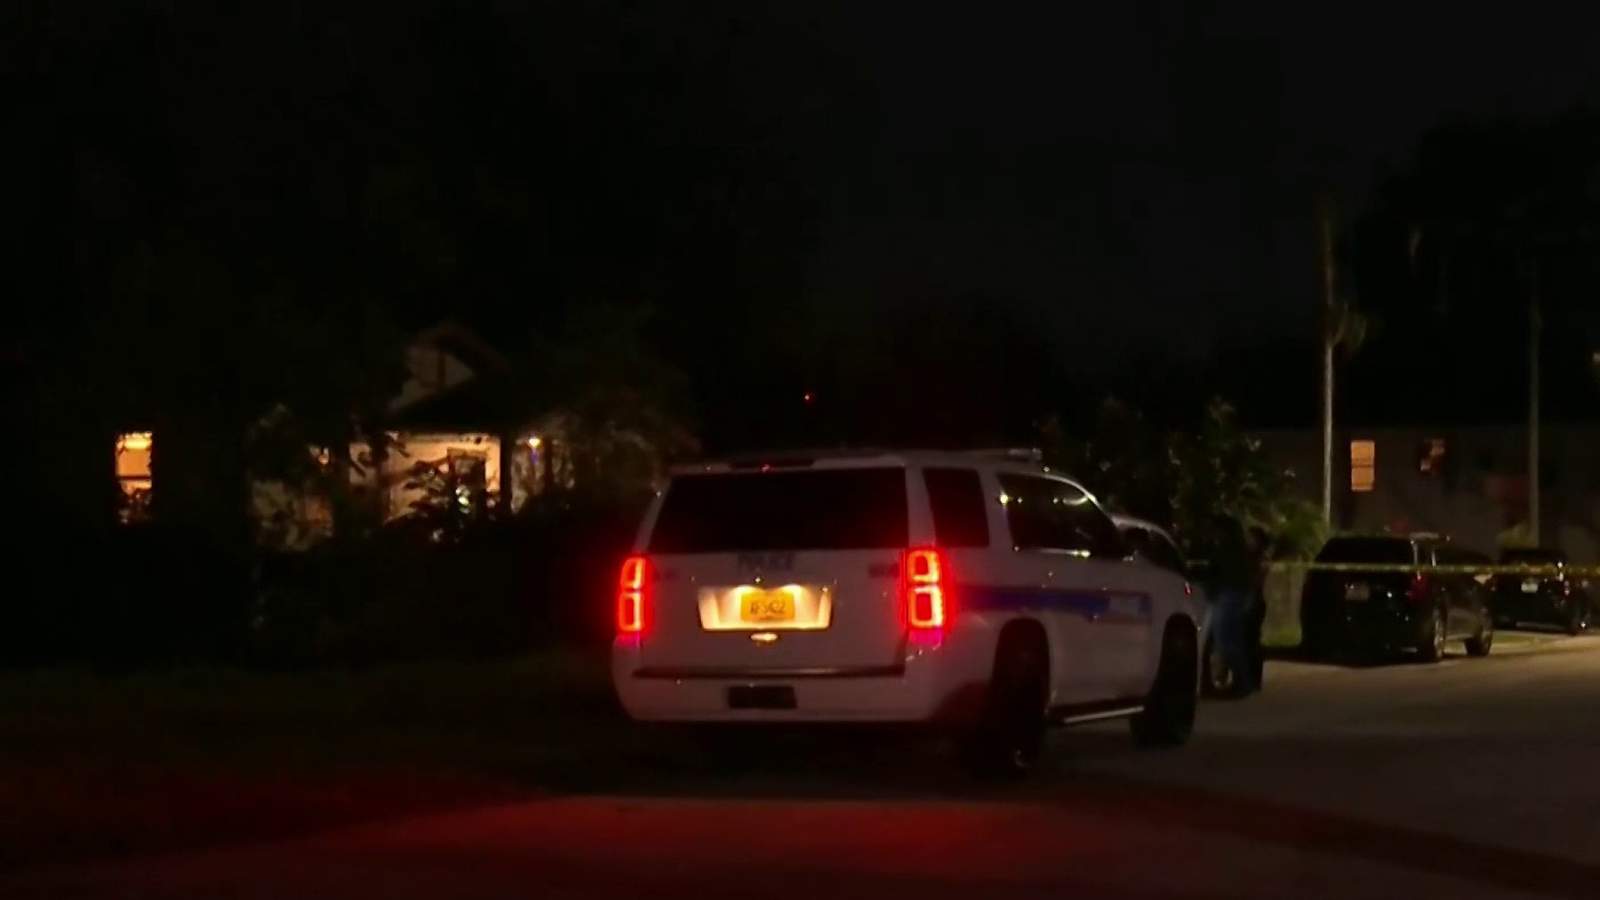 Man shot, killed in argument with family member; Daytona Beach police search for suspect